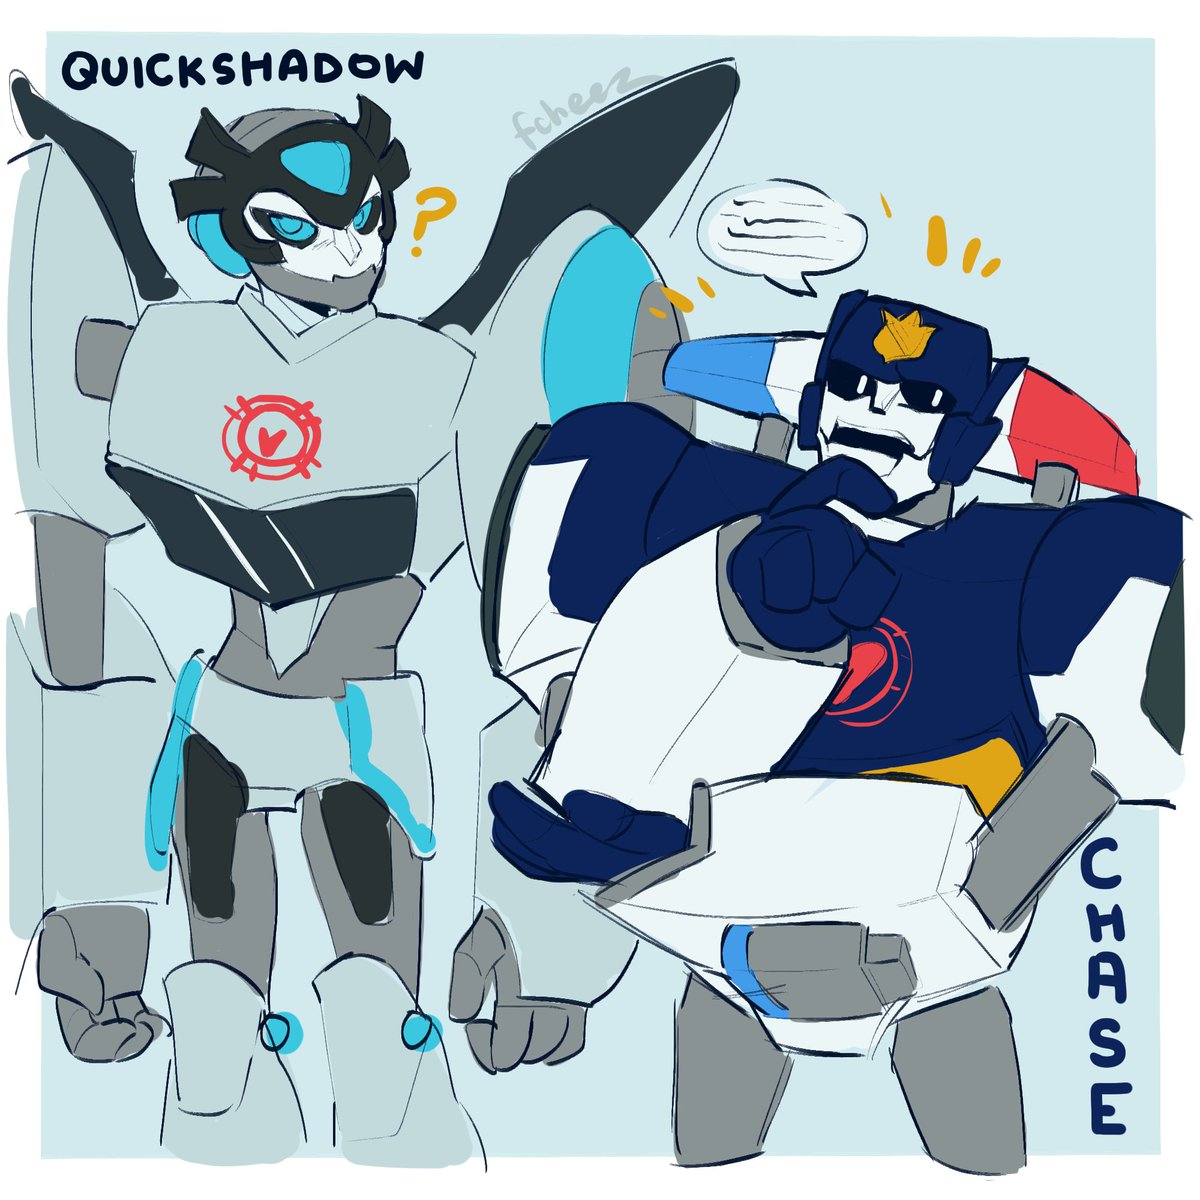 my favs,, #transformers
#rescuebots